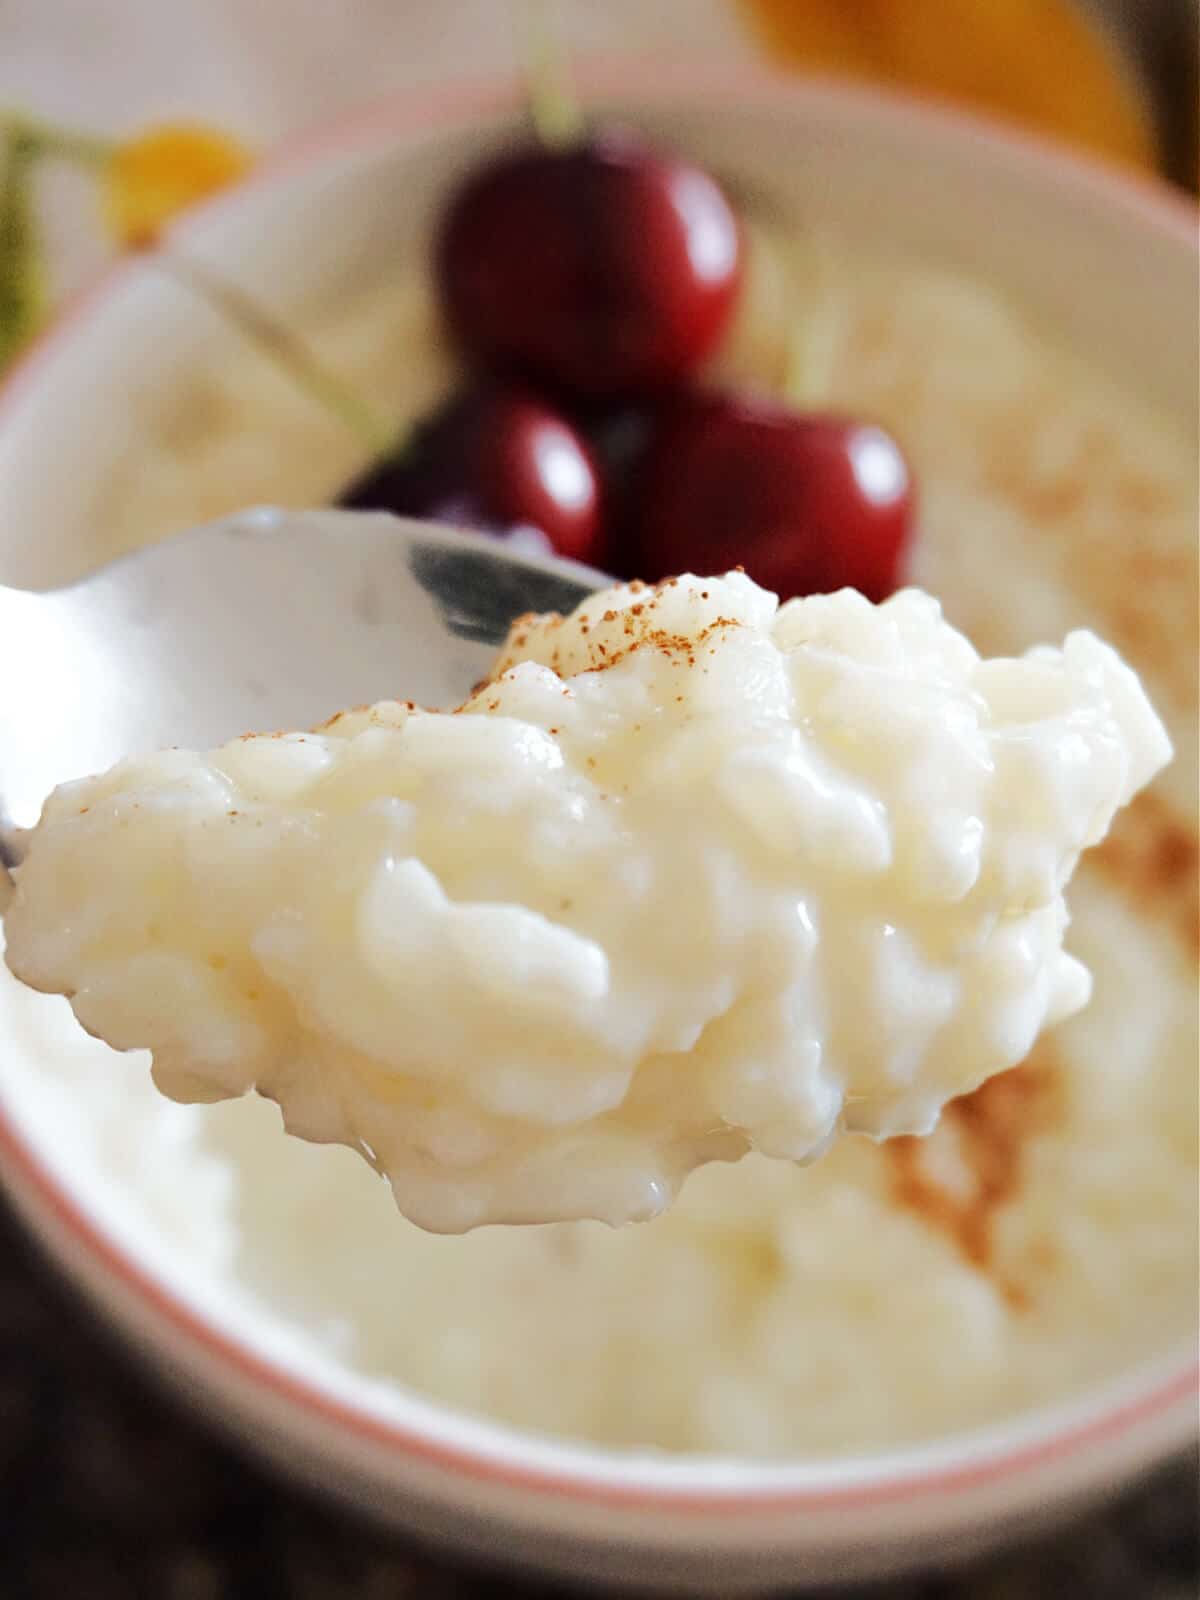 A spoonful of rice pudding over a bowl with more pudding and 3 cherries.